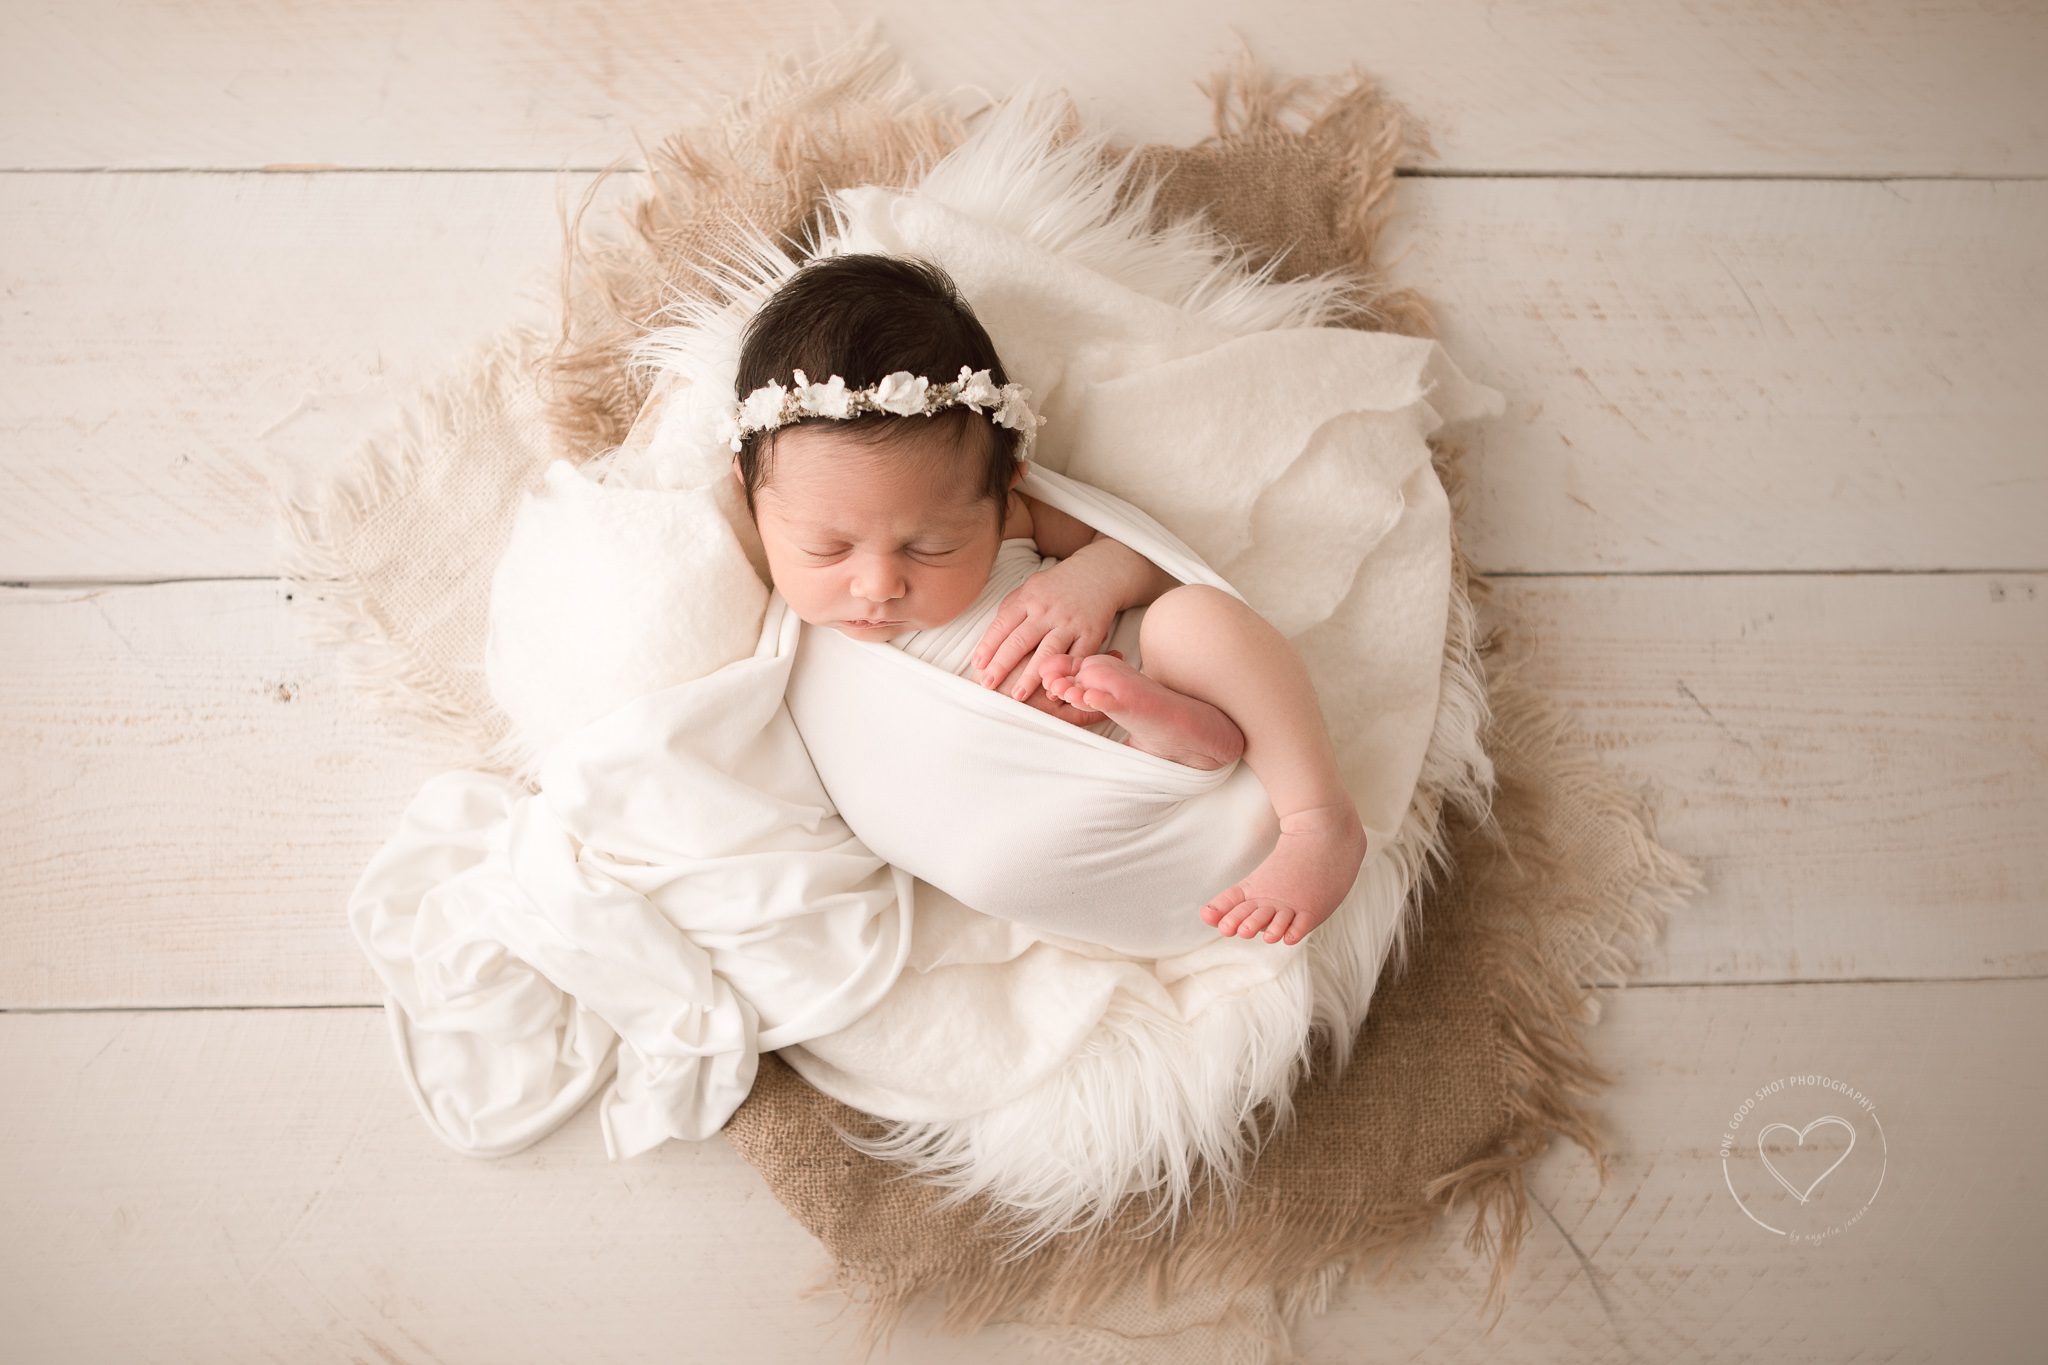 fresno newborn photographer, neutral, baby wrapped in white, laying in bowl, shot from above